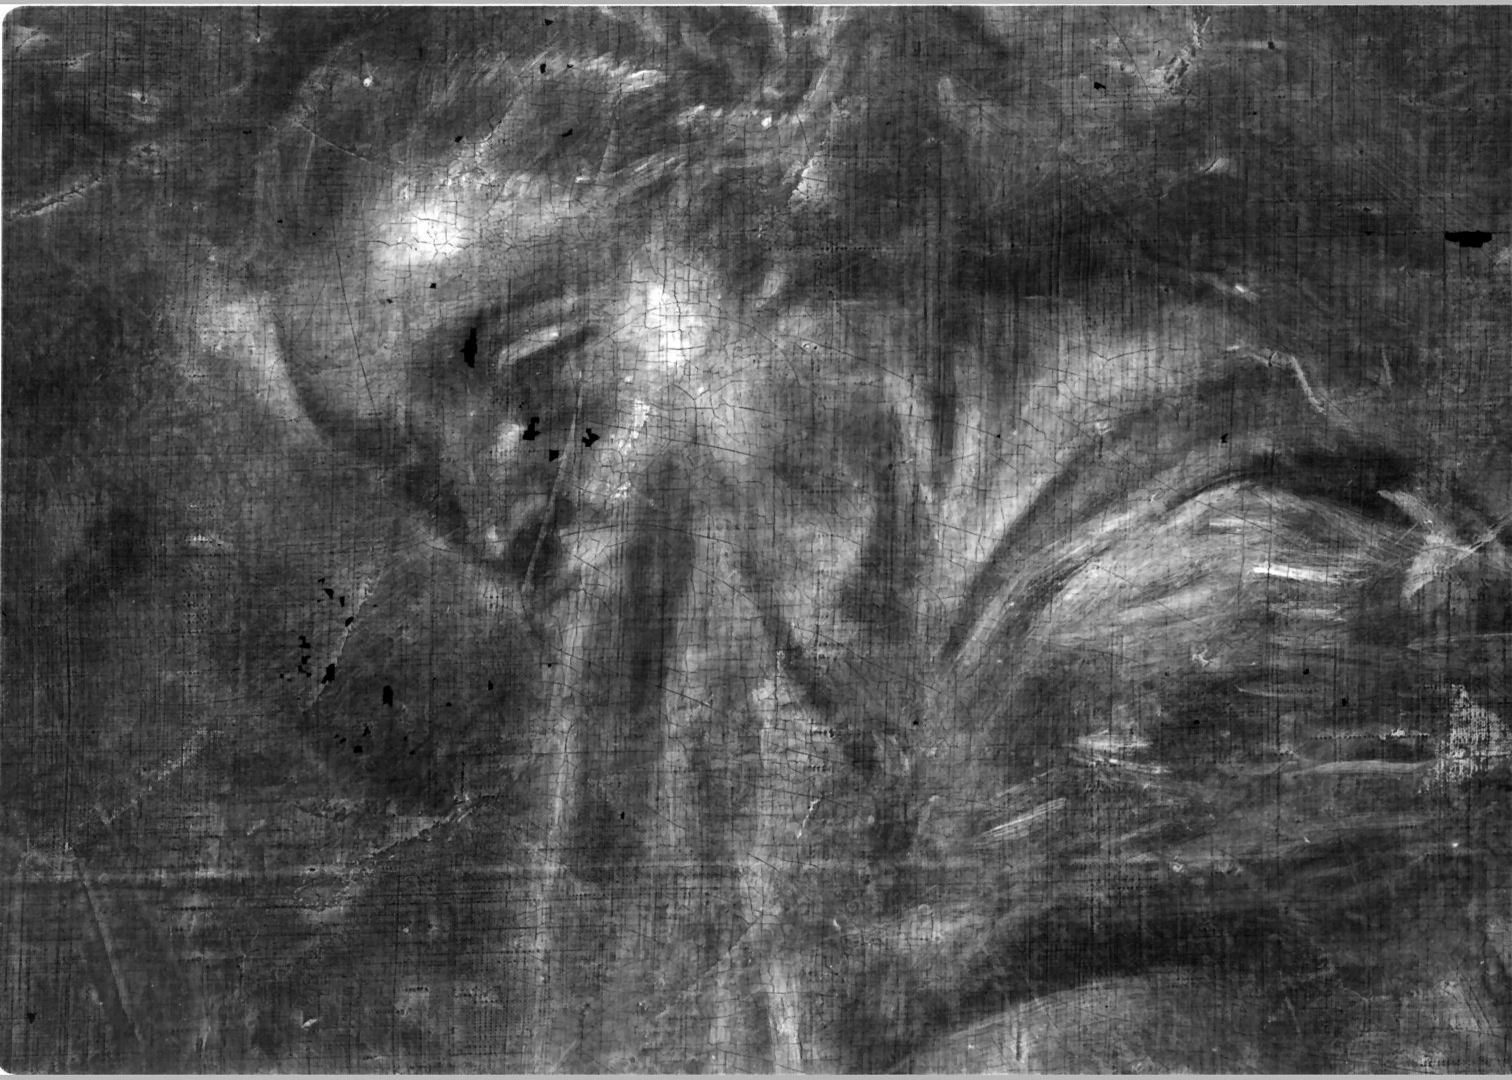 X-radiograph (detail) with the revealed head of a woman painted over.